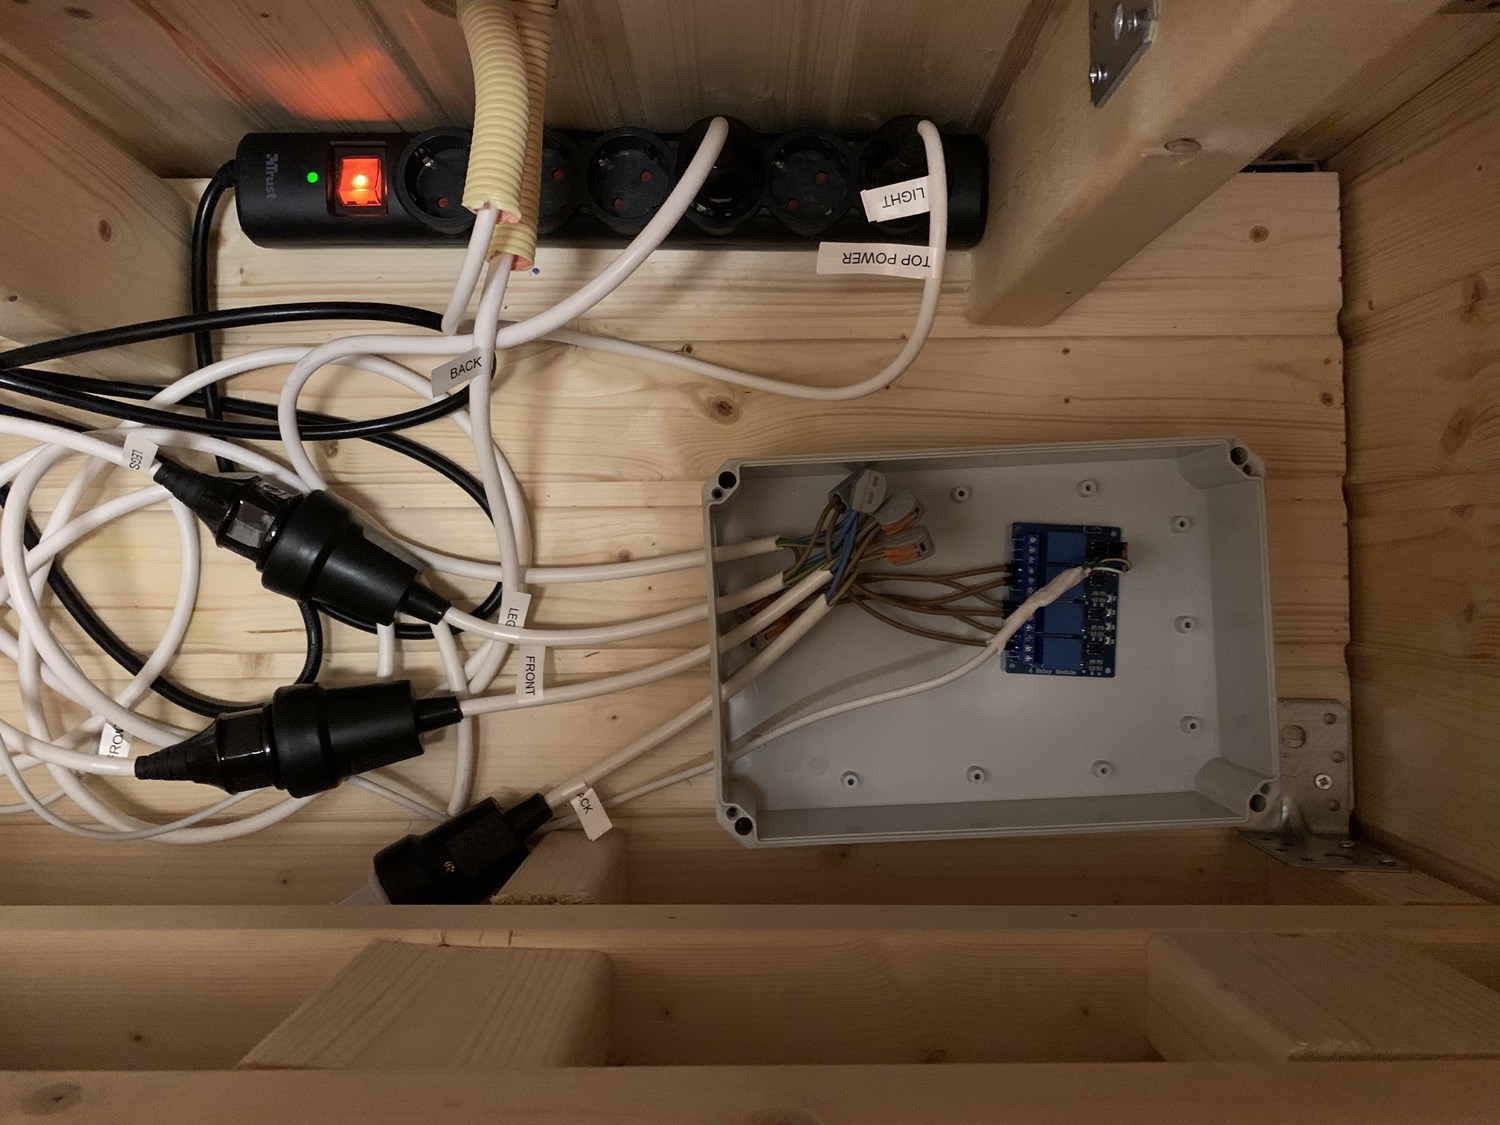 Relay box installed underneath the bench in the sauna.